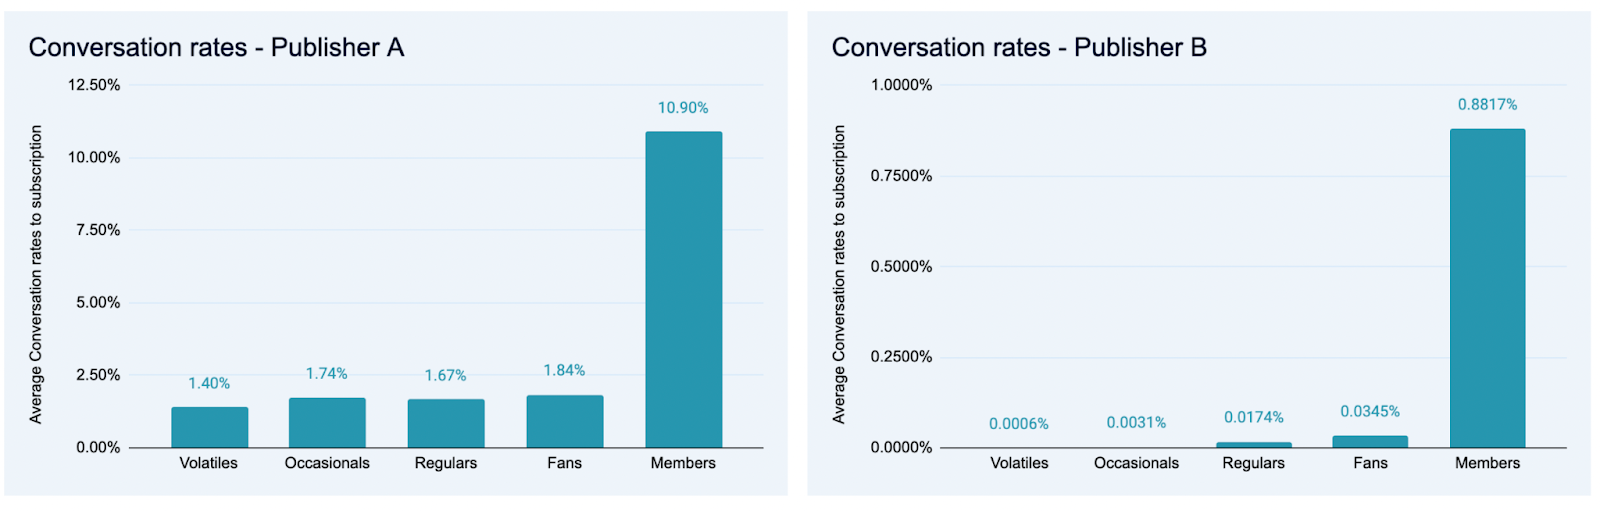 6 Ways To Optimize Your Paywall Conversion Rates.